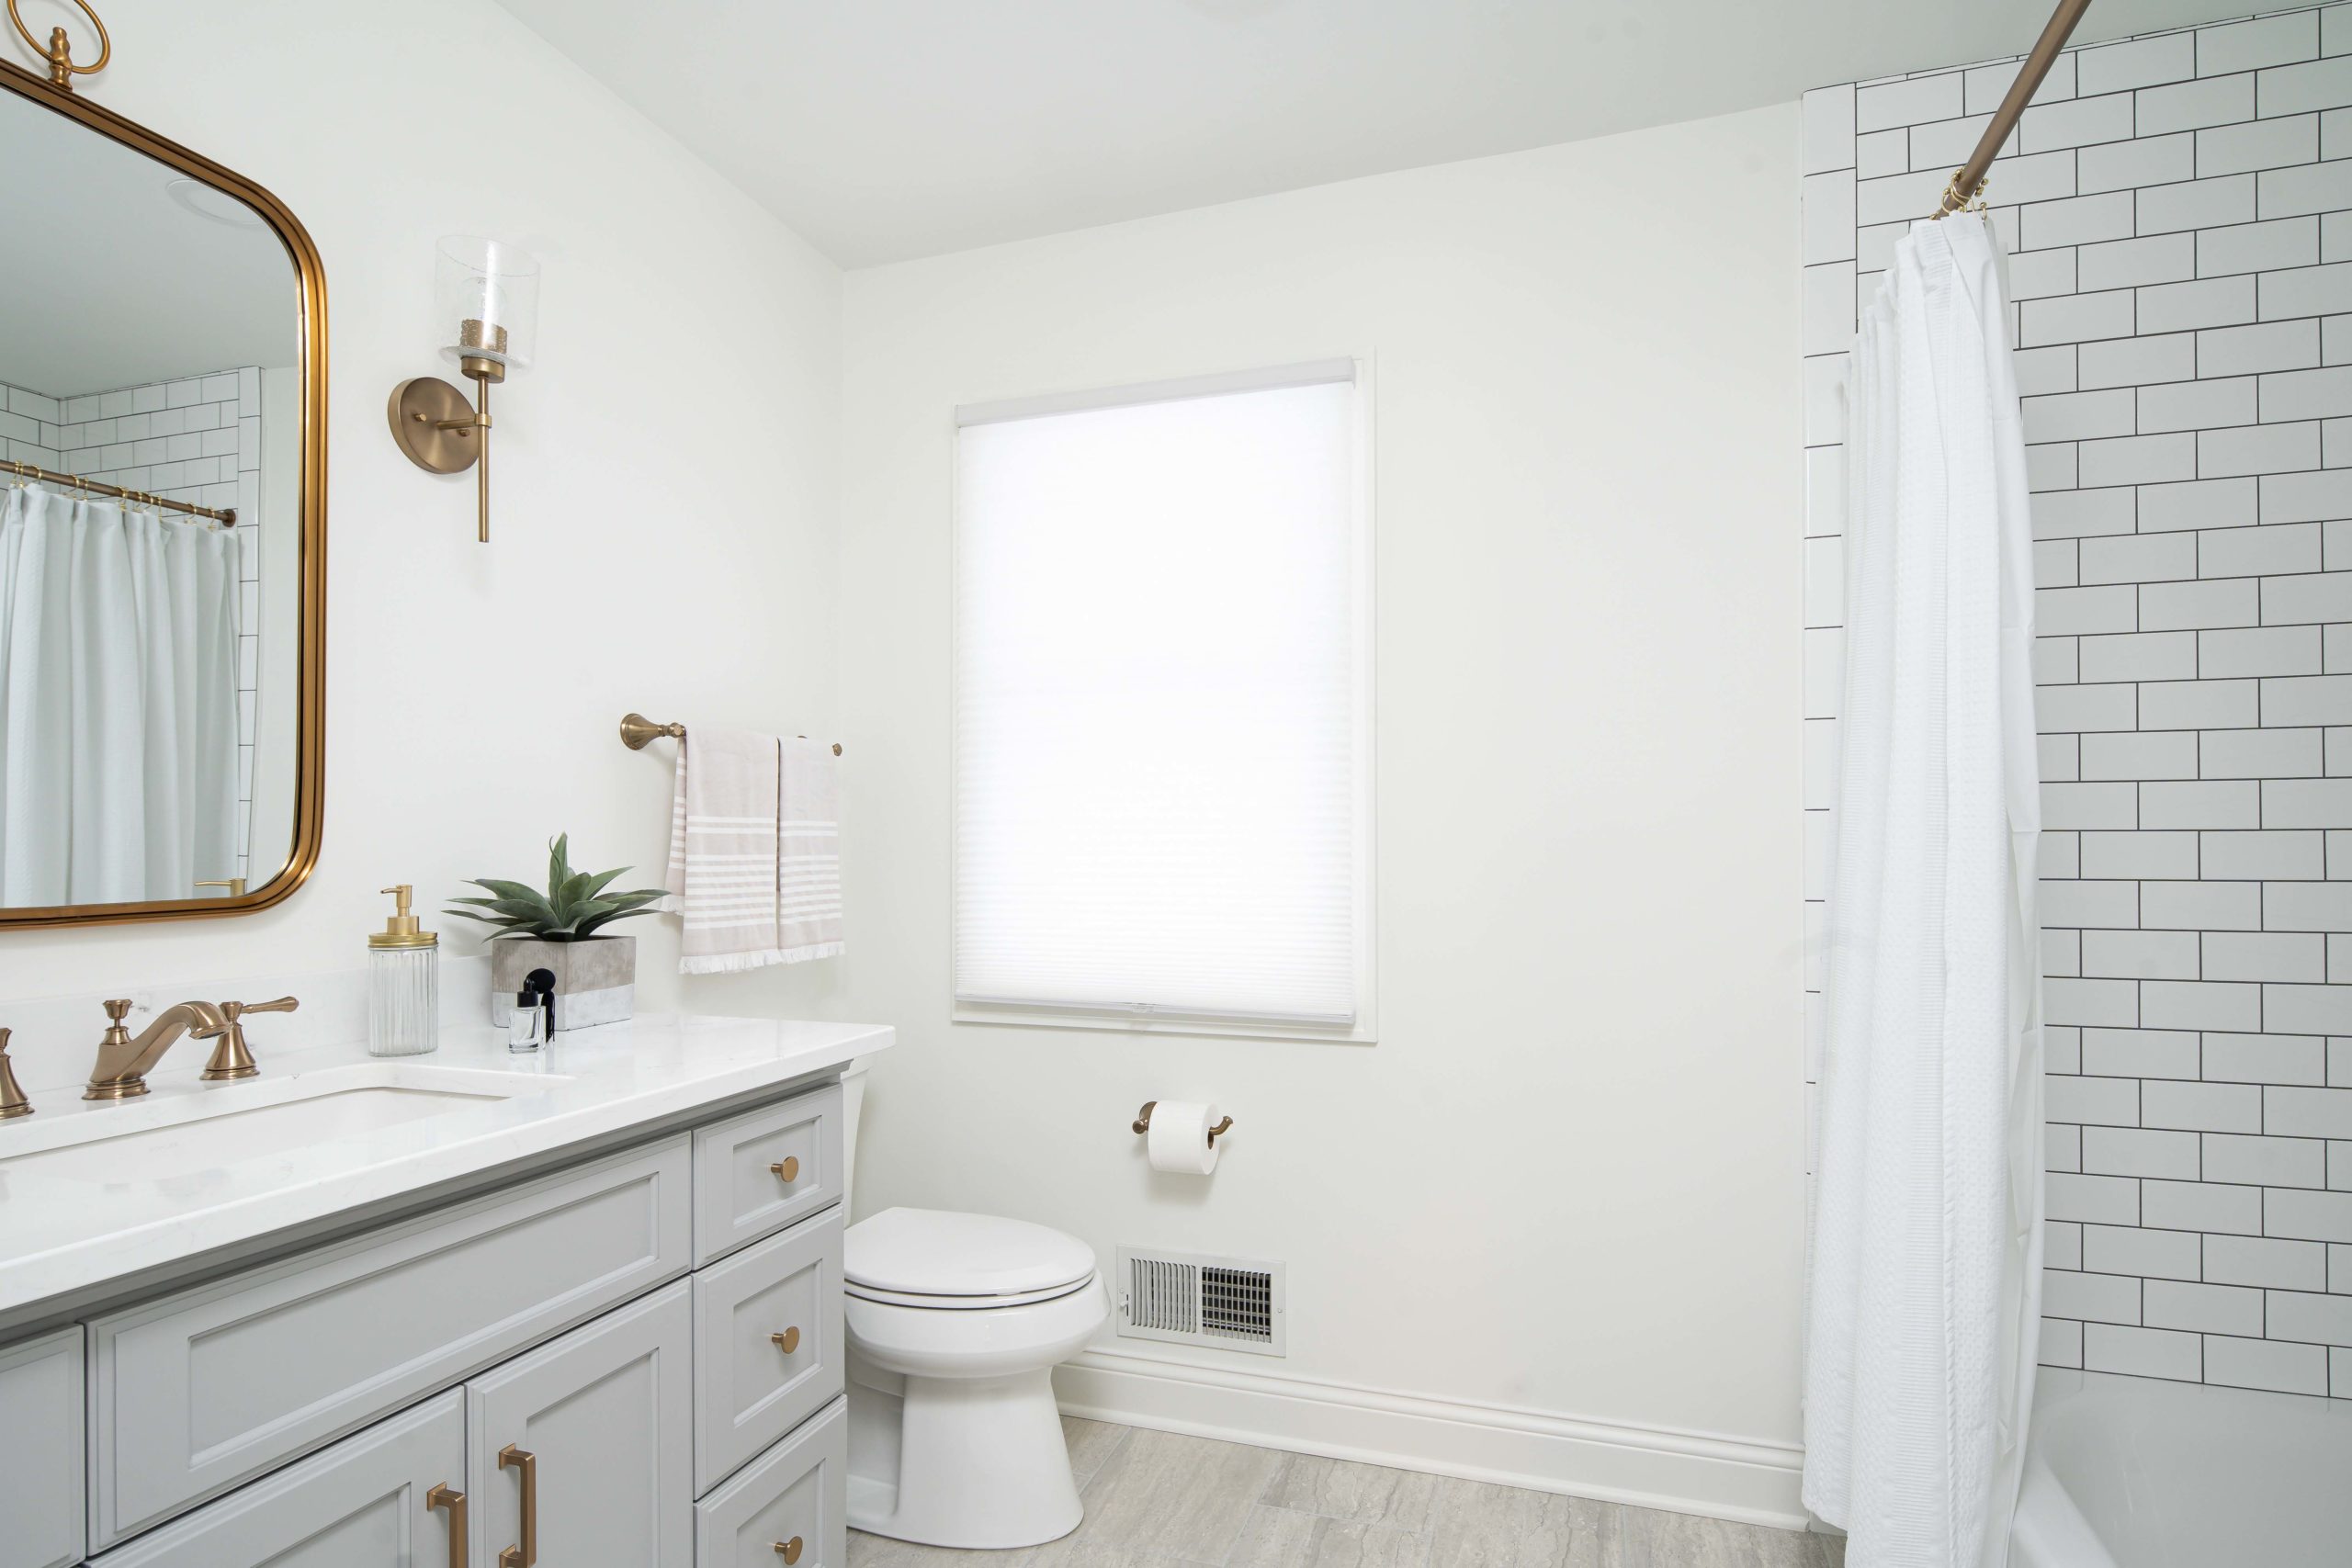 A white and gold bathroom with a toilet and sink, perfect for a kitchen remodel.